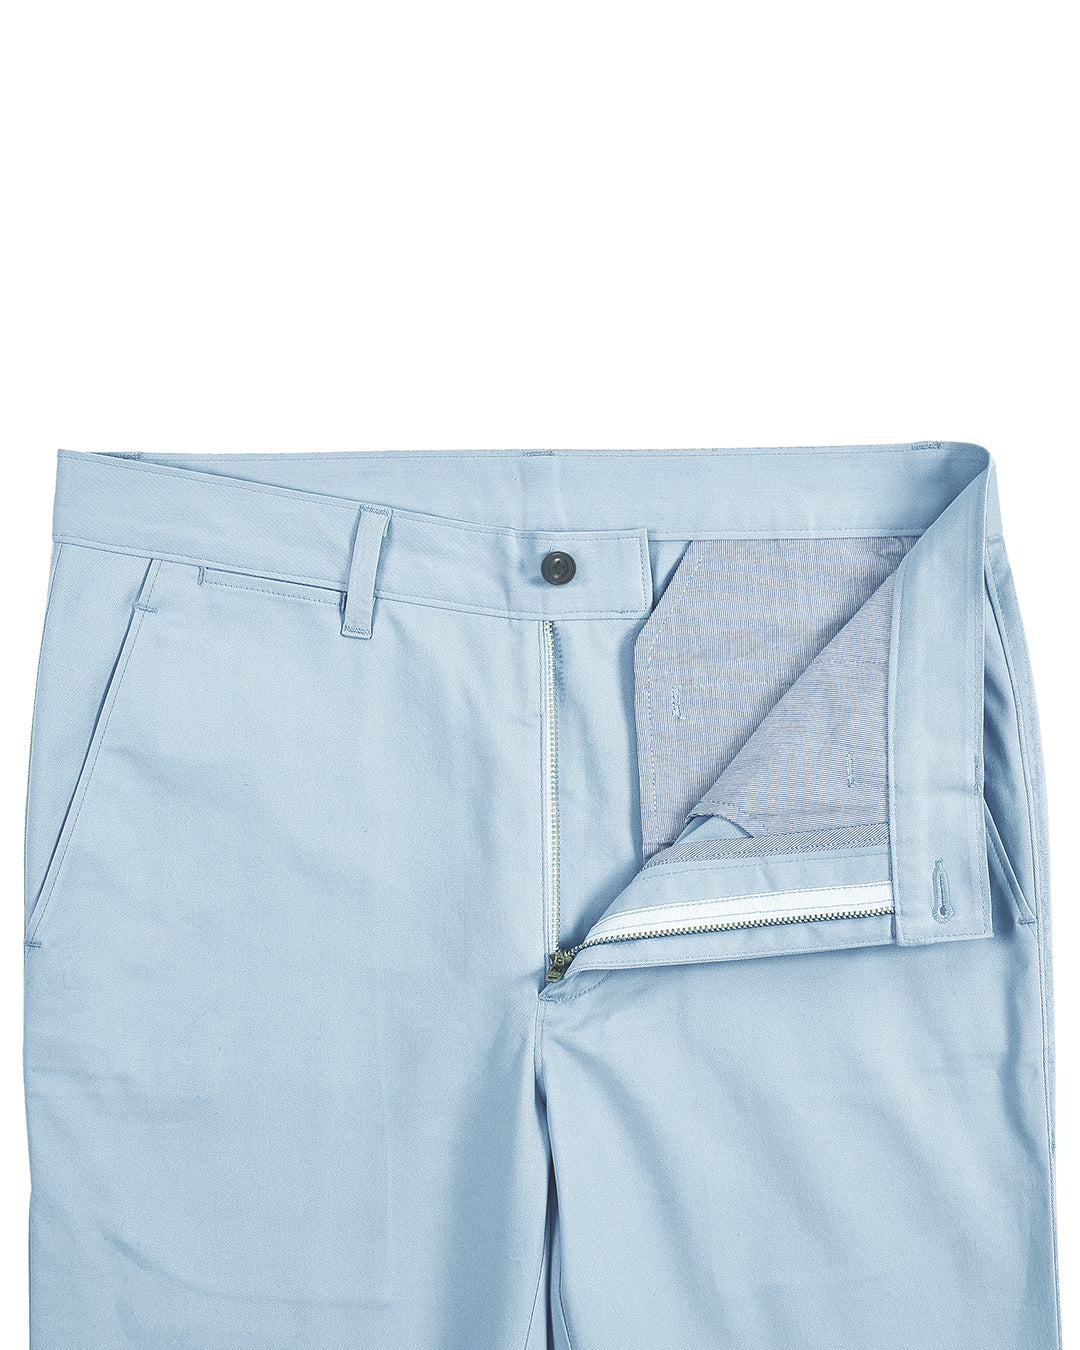 Front open view of custom Genoa Chino pants for men by Luxire in powder blue